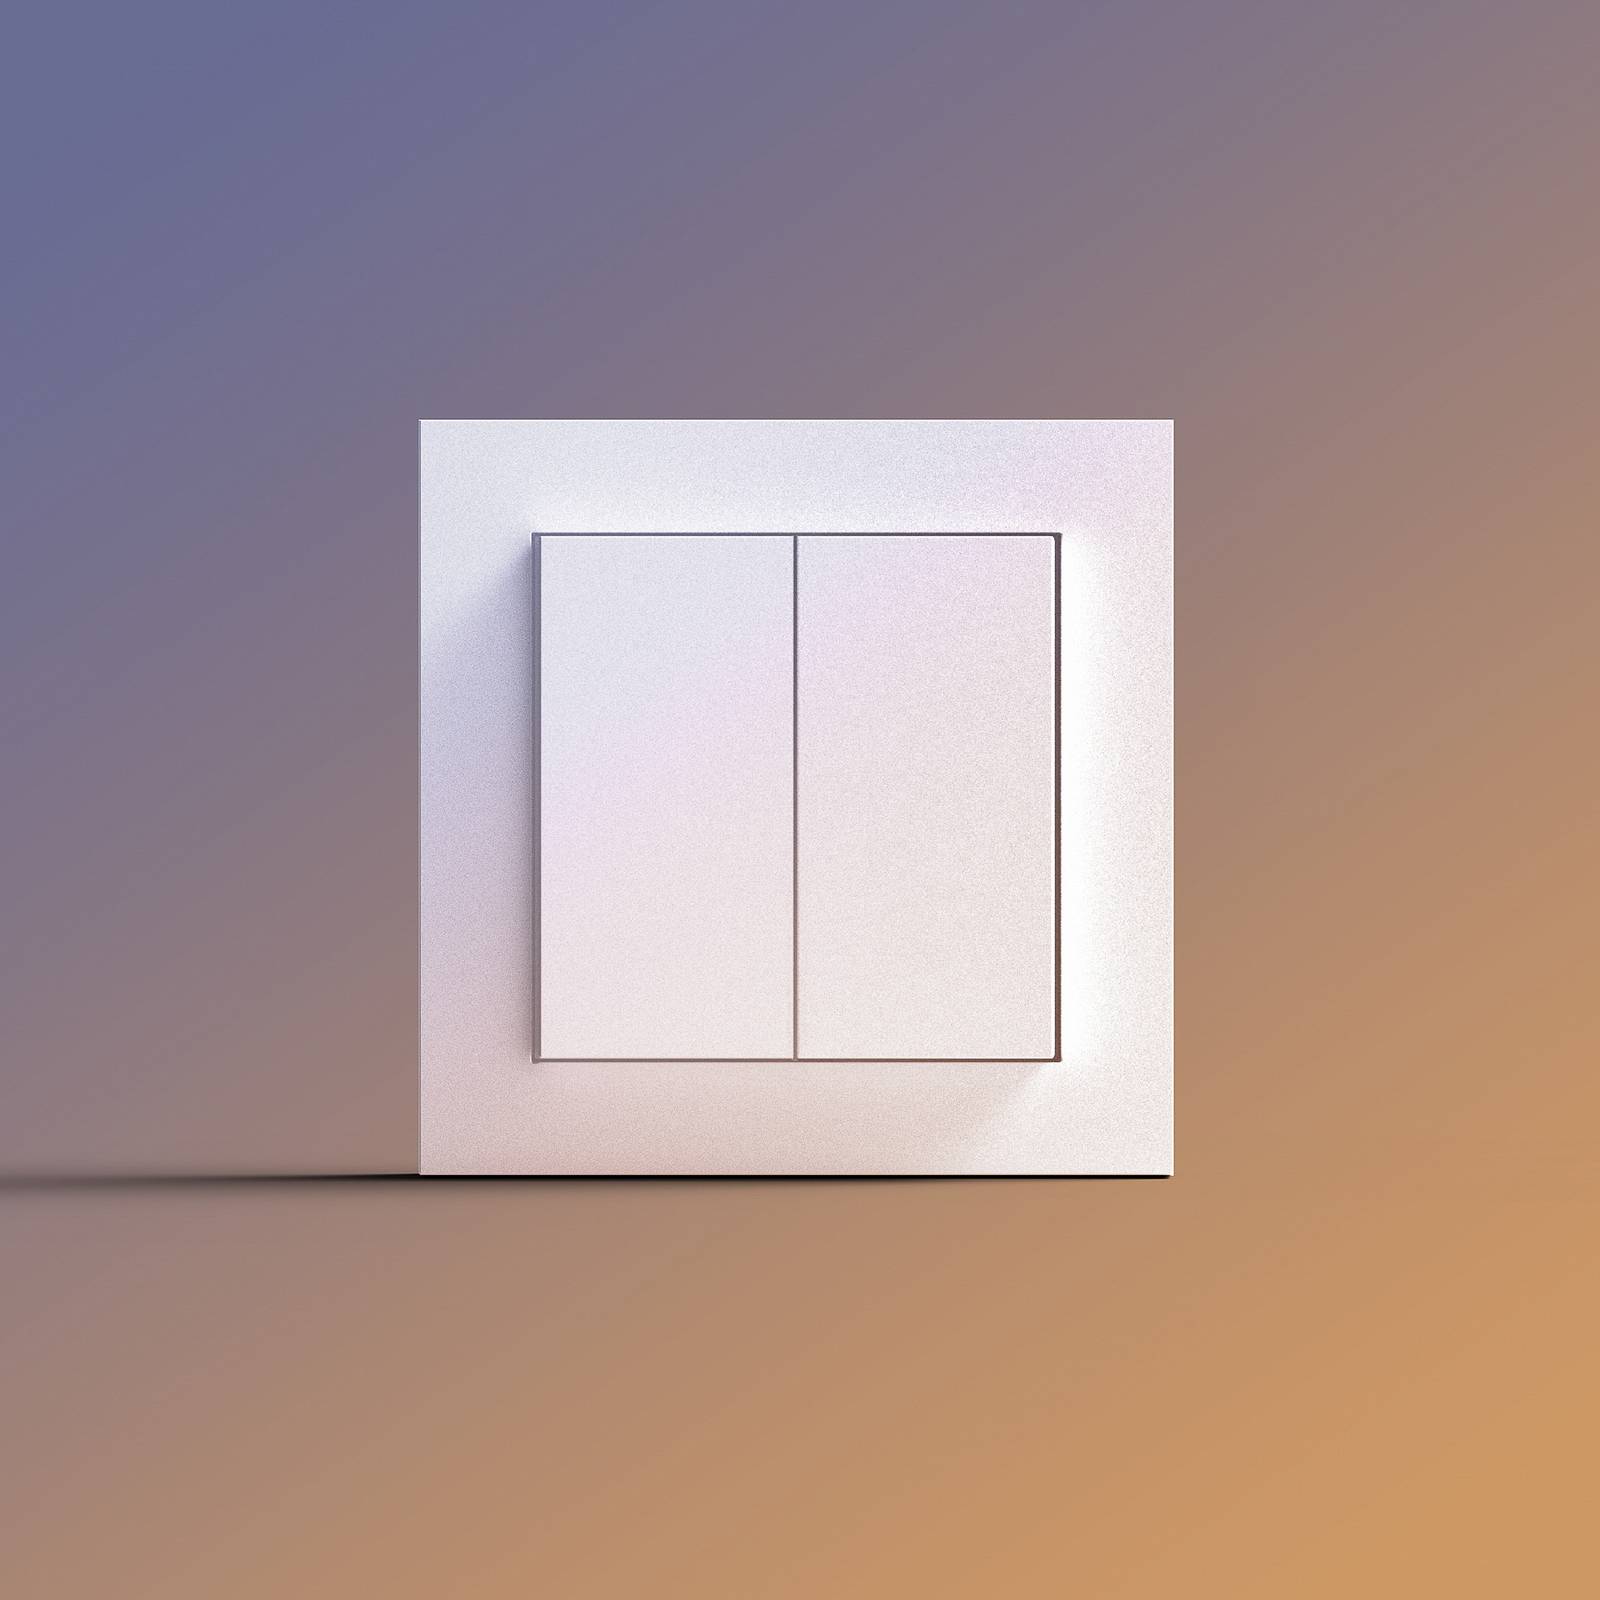 Image of Senic Smart Switch pour Philips Hue, x4, blanc mat 